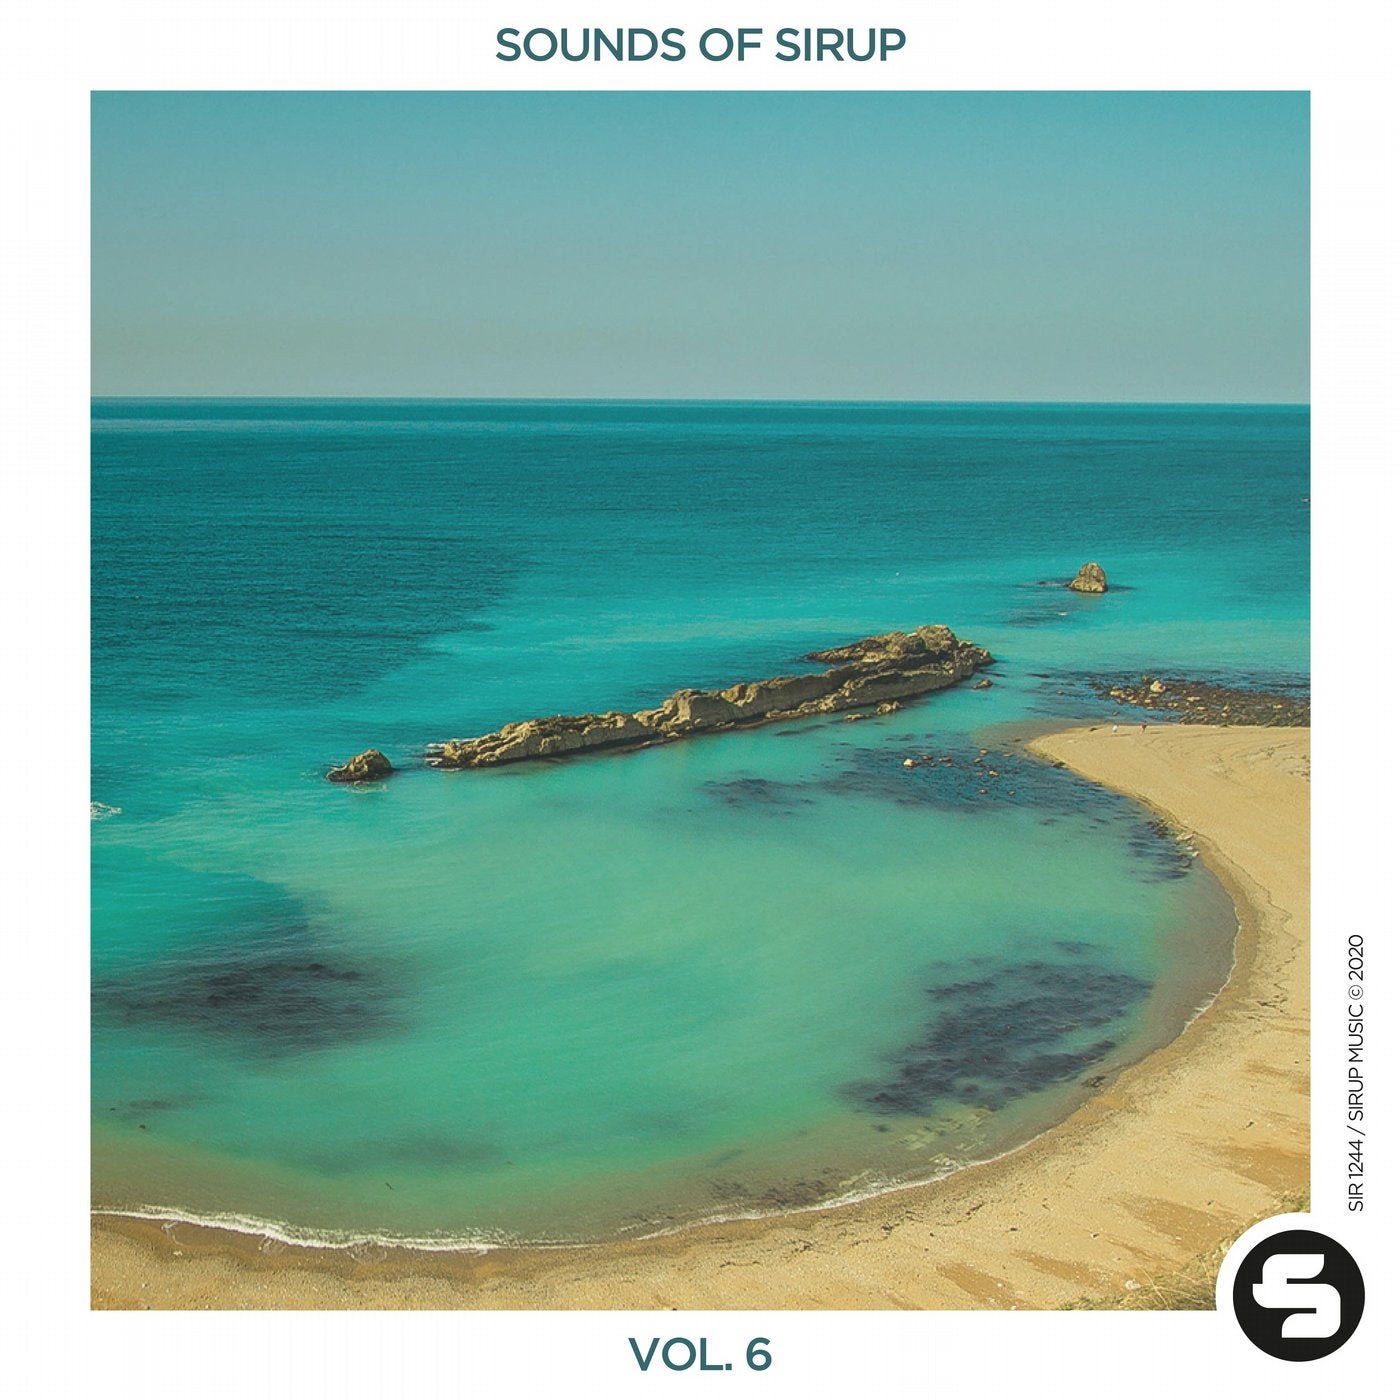 Sounds of Sirup, Vol. 6